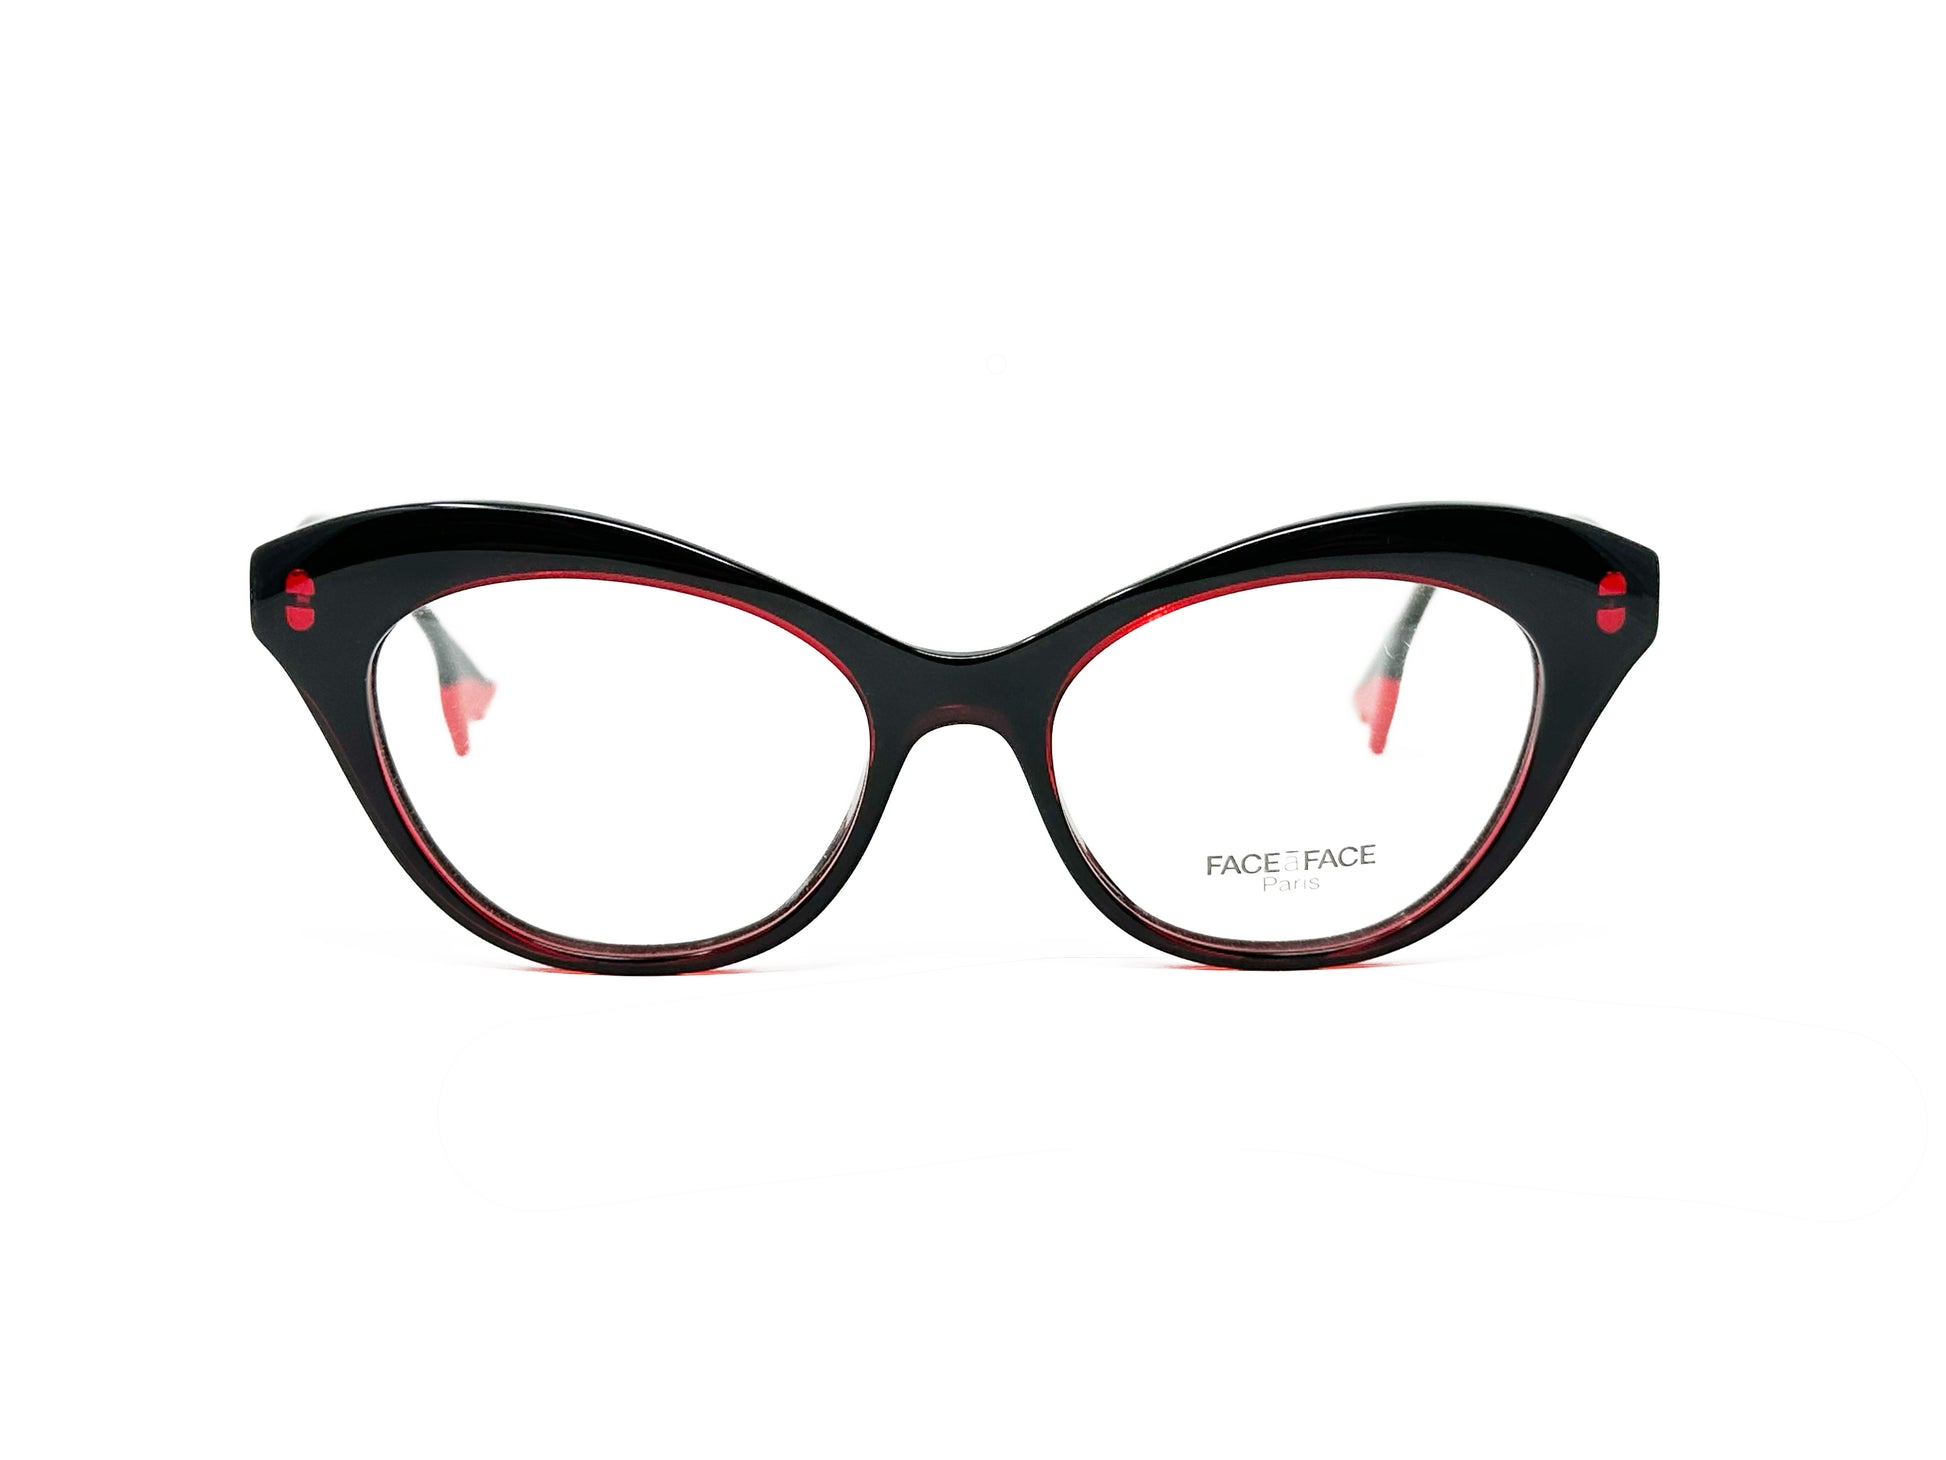 Face a Face acetate, cat-eye optical frame with curved top. Model: Bocca 3. Color: 400 -Black with red temples. Front view.